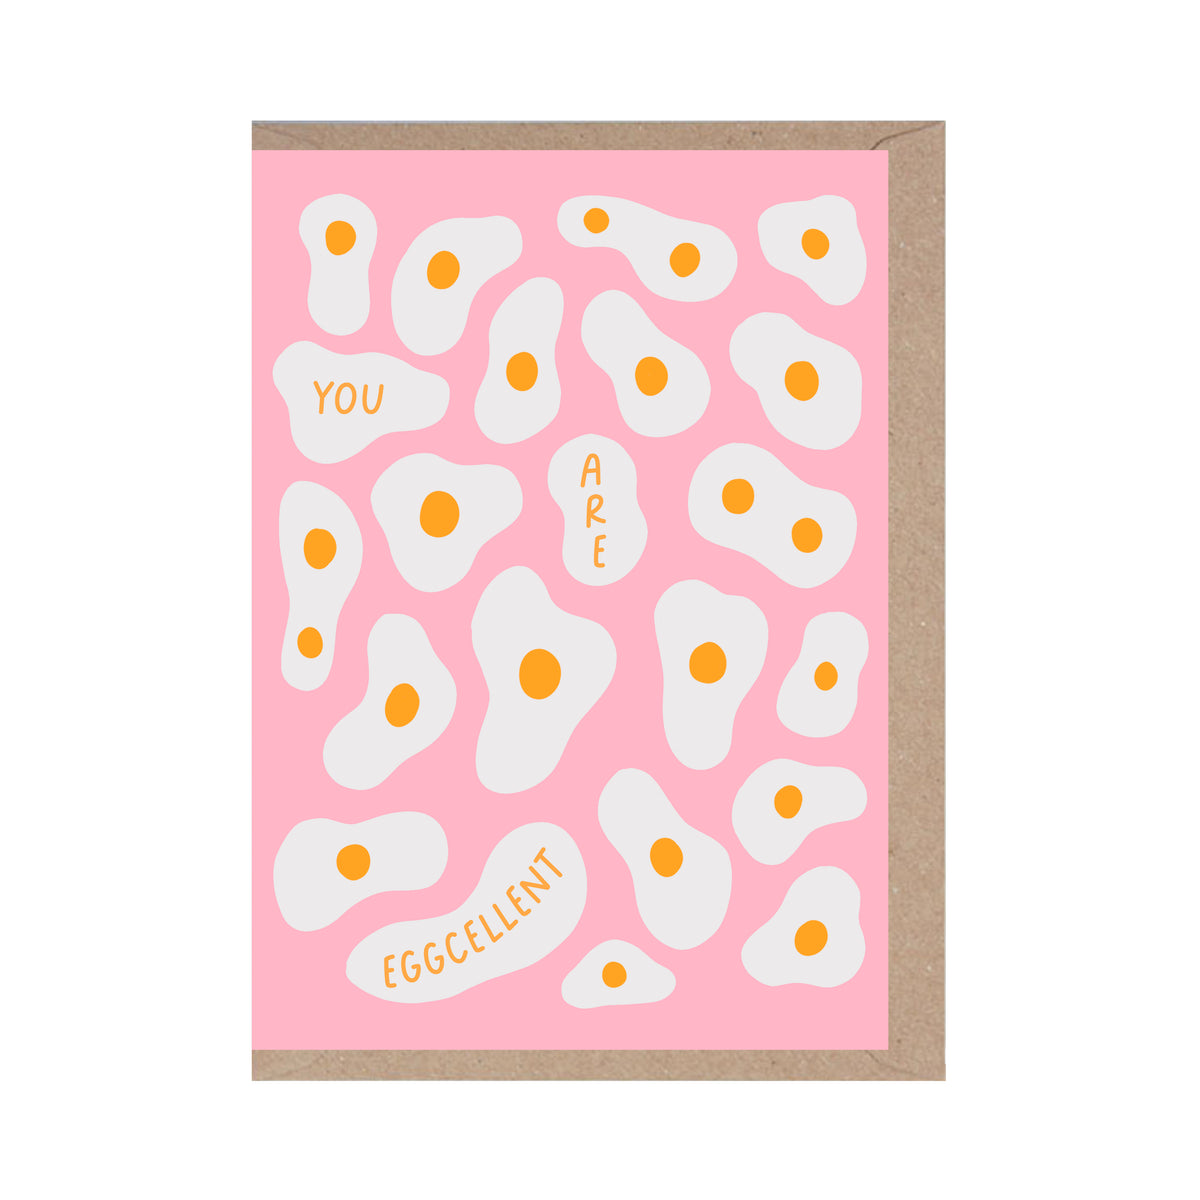 You Are Eggcellent Funny Valentine Card - penny black